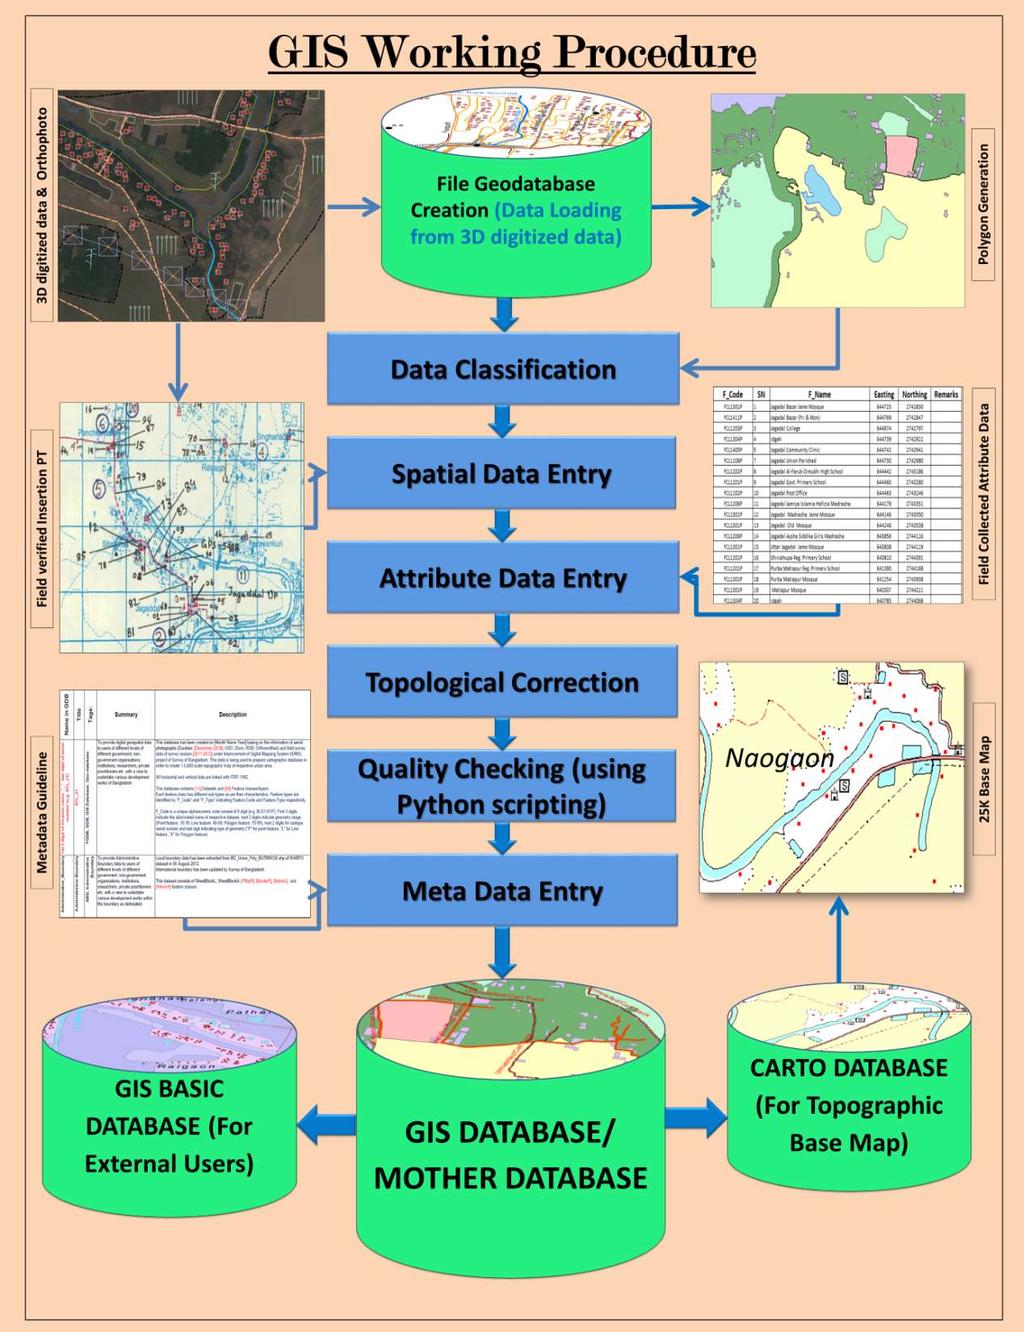 Working procedure for making GIS and Cartographic